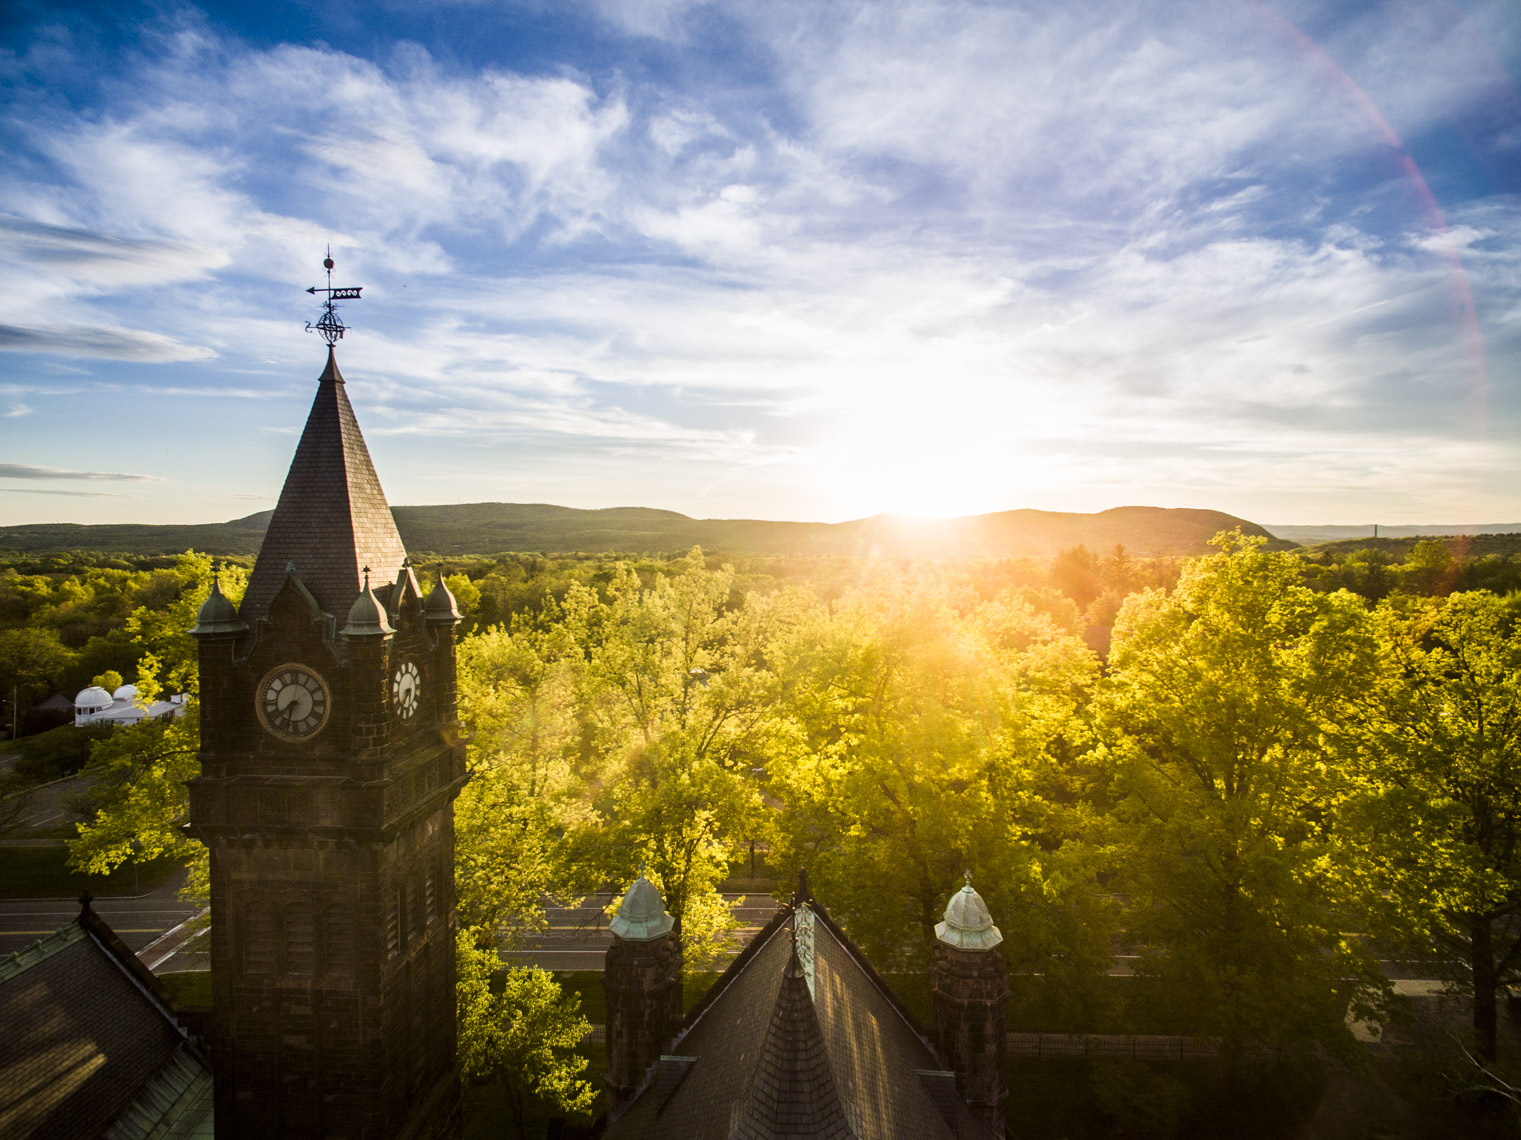 Sunset over the campus of Mount Holyoke College in Massachusetts